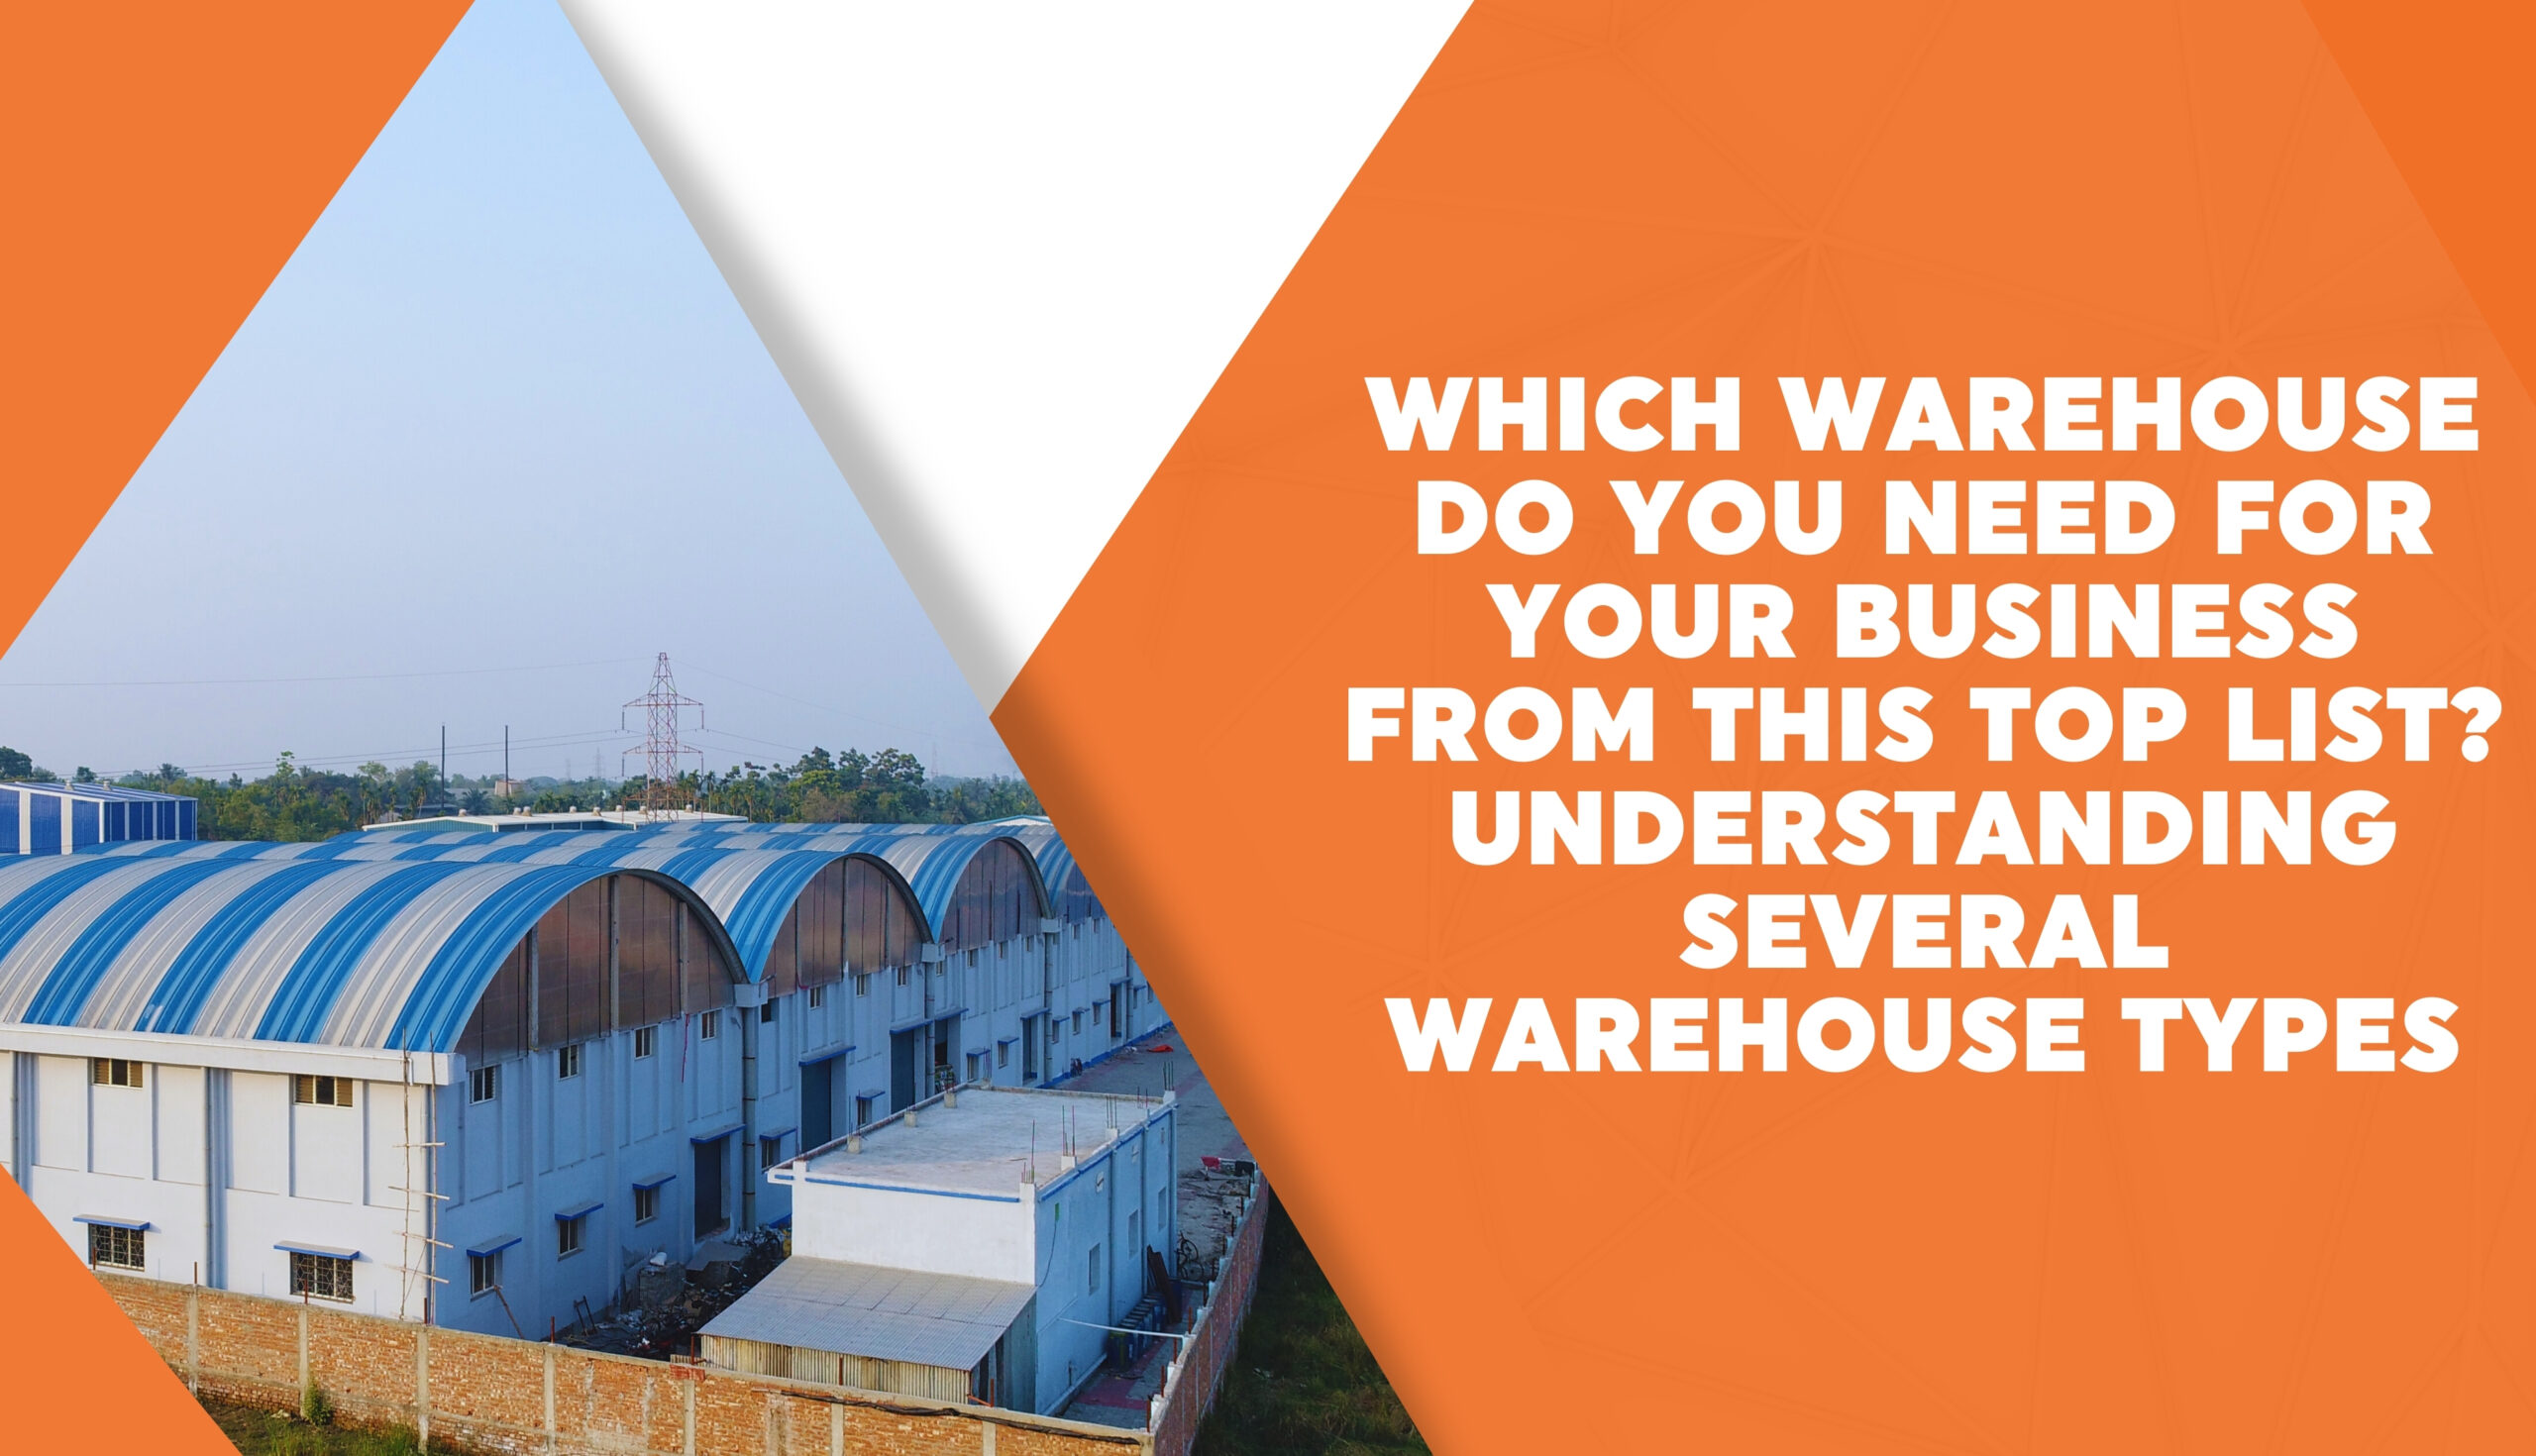 Which Warehouse Do You Need for Your Business from This Top List? Understanding Several Warehouse Types